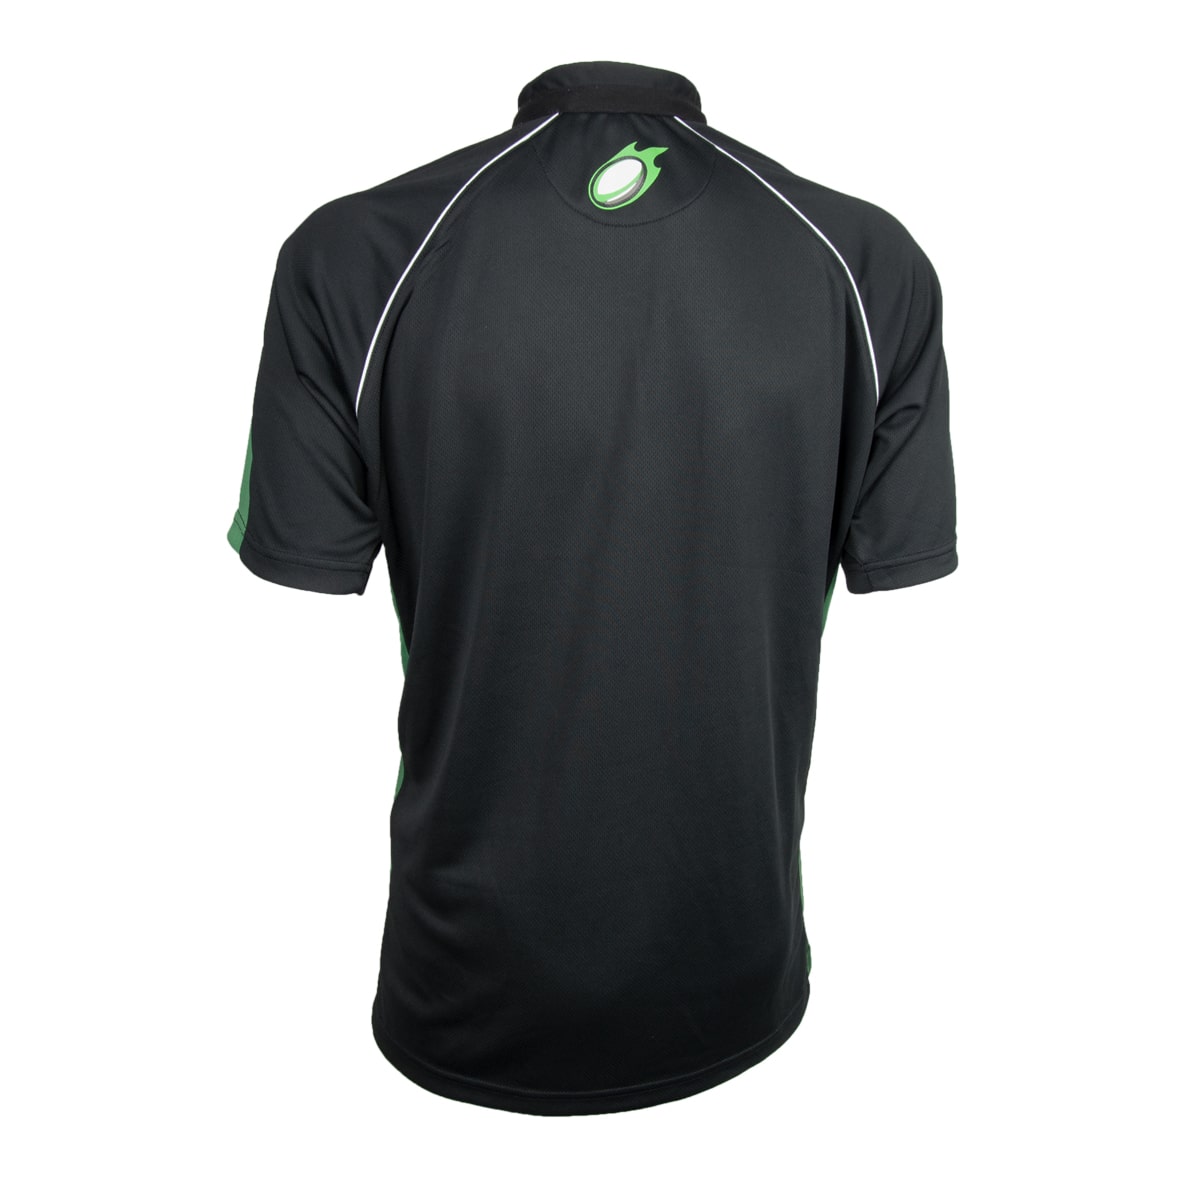 Ireland Black and Green Performance Rugby Jersey